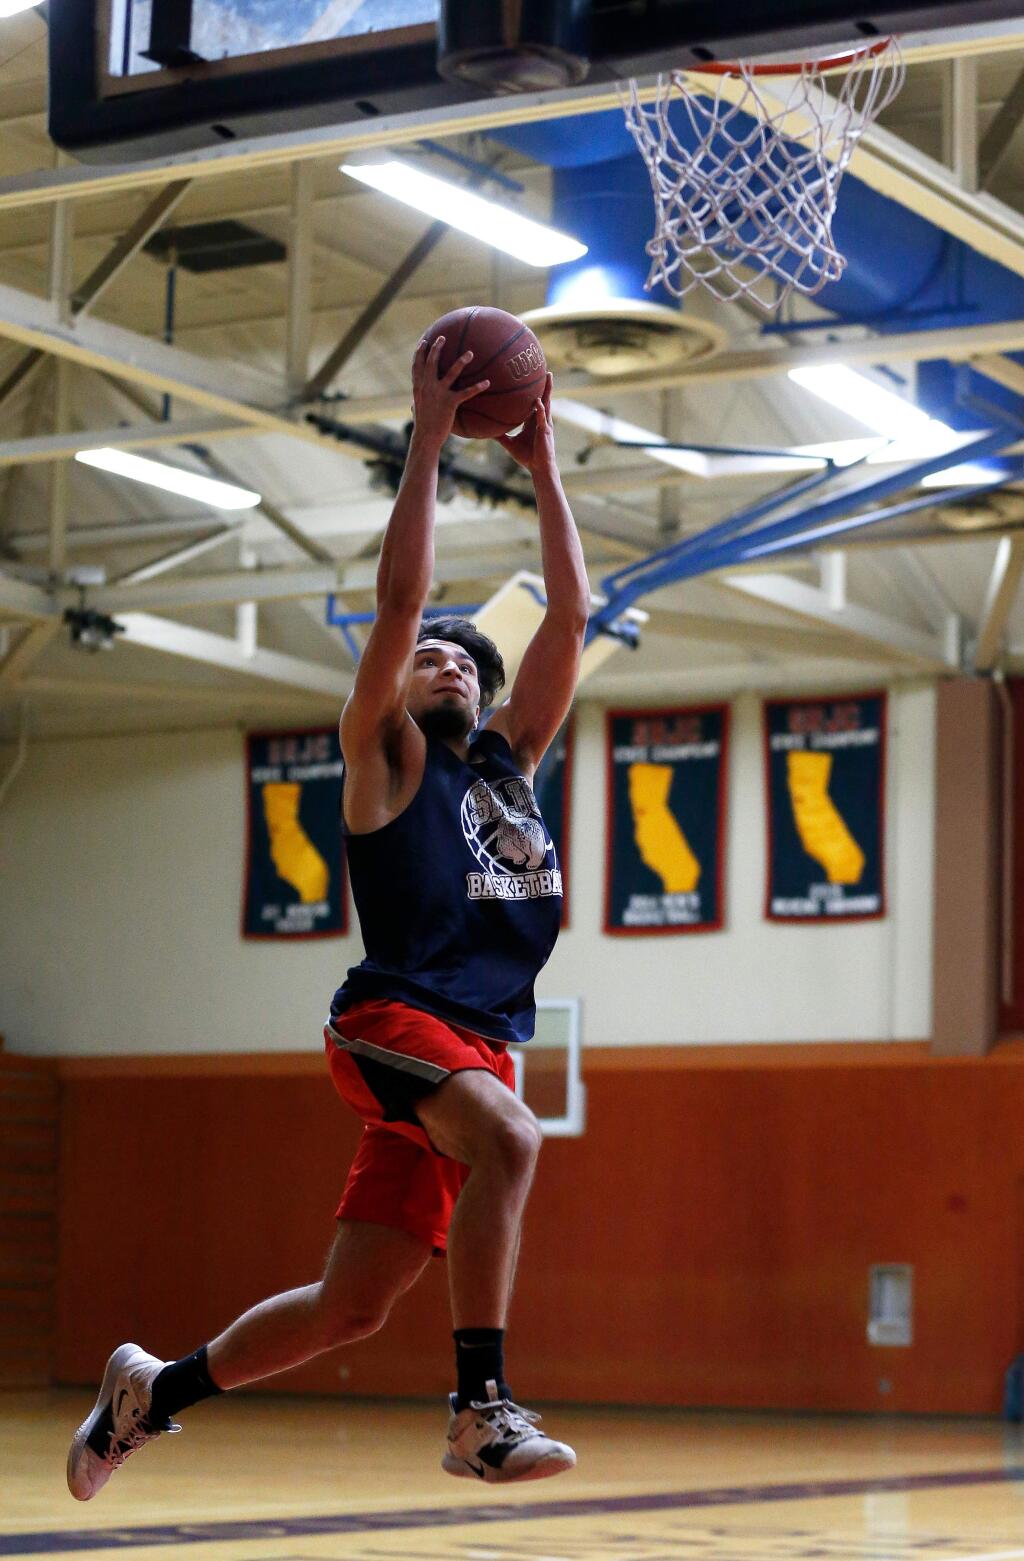 SRJC Bear Cubs guard and Big 8 player of the year Atmar Mundu goes for a lay-in during practice at Haehl Pavilion in Santa Rosa on Tuesday, March 10, 2020. (Alvin Jornada / The Press Democrat)